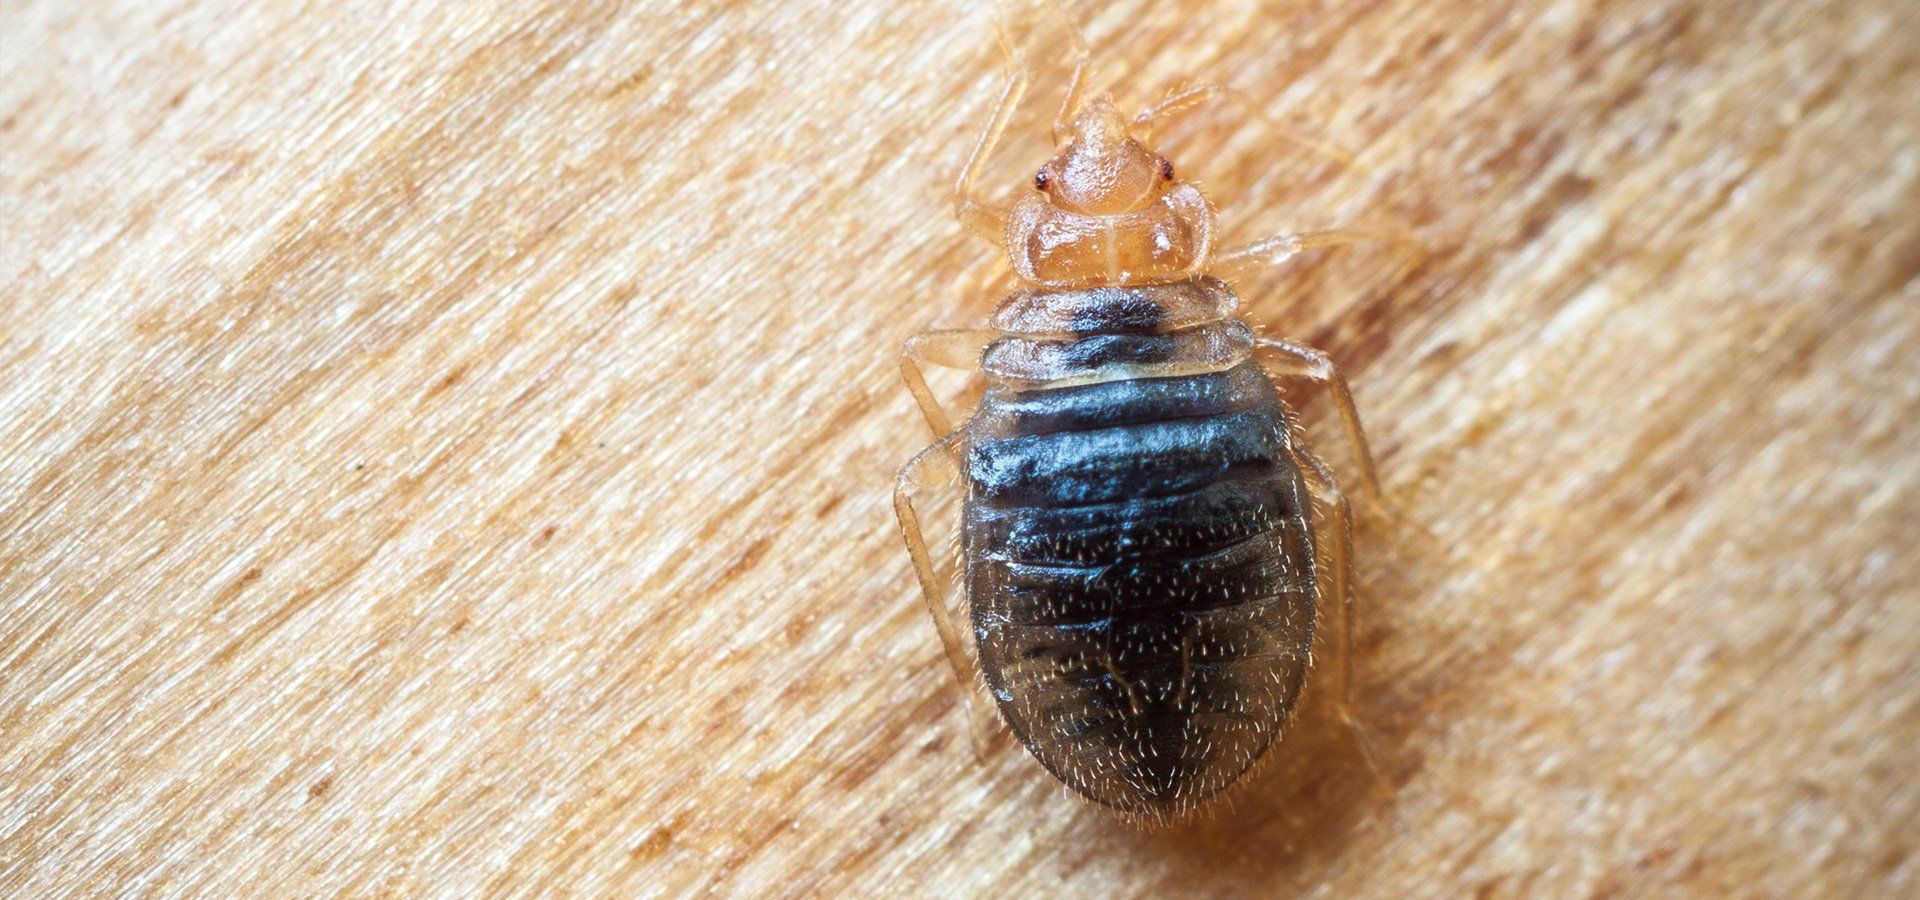 extreme close up photo of bed bug